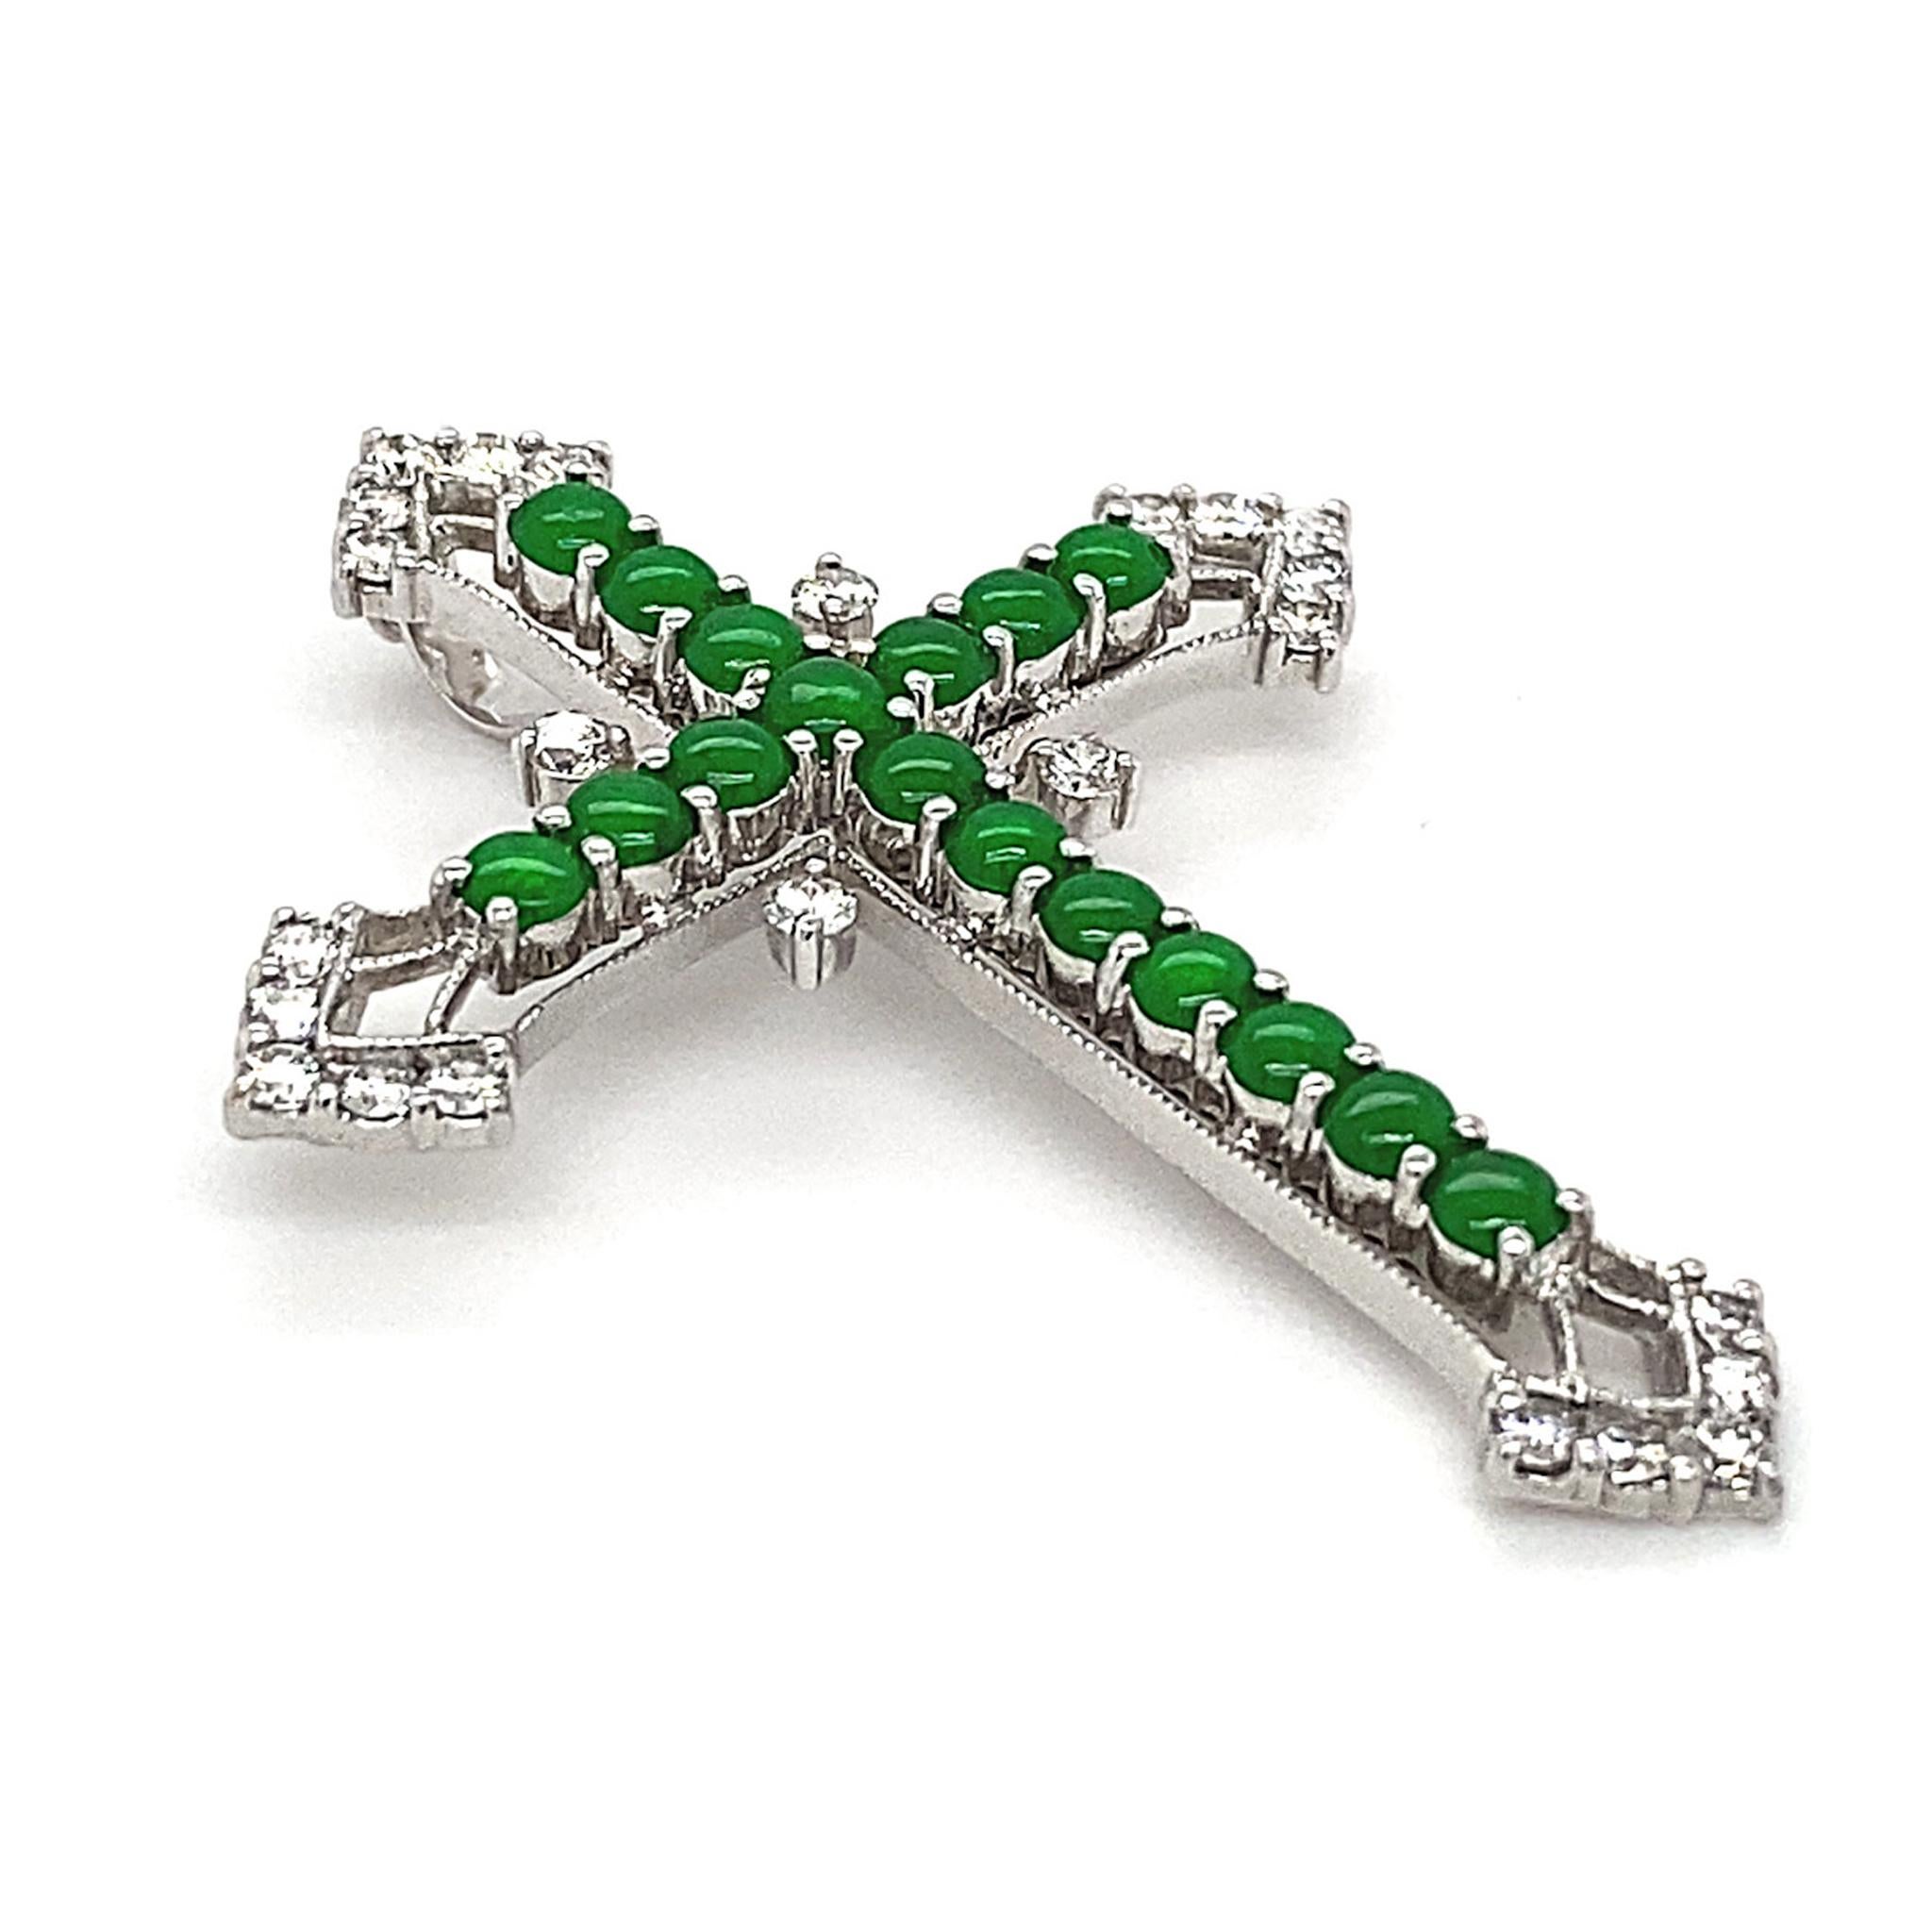 Giving the traditional cross symbol an oriental reincarnation, the House of Dilys' is proud to present this sensational 18K White Gold pendant, adorned with 17 Imperial Green Jade pieces that are incredibly rich in colour and lustre, totalling